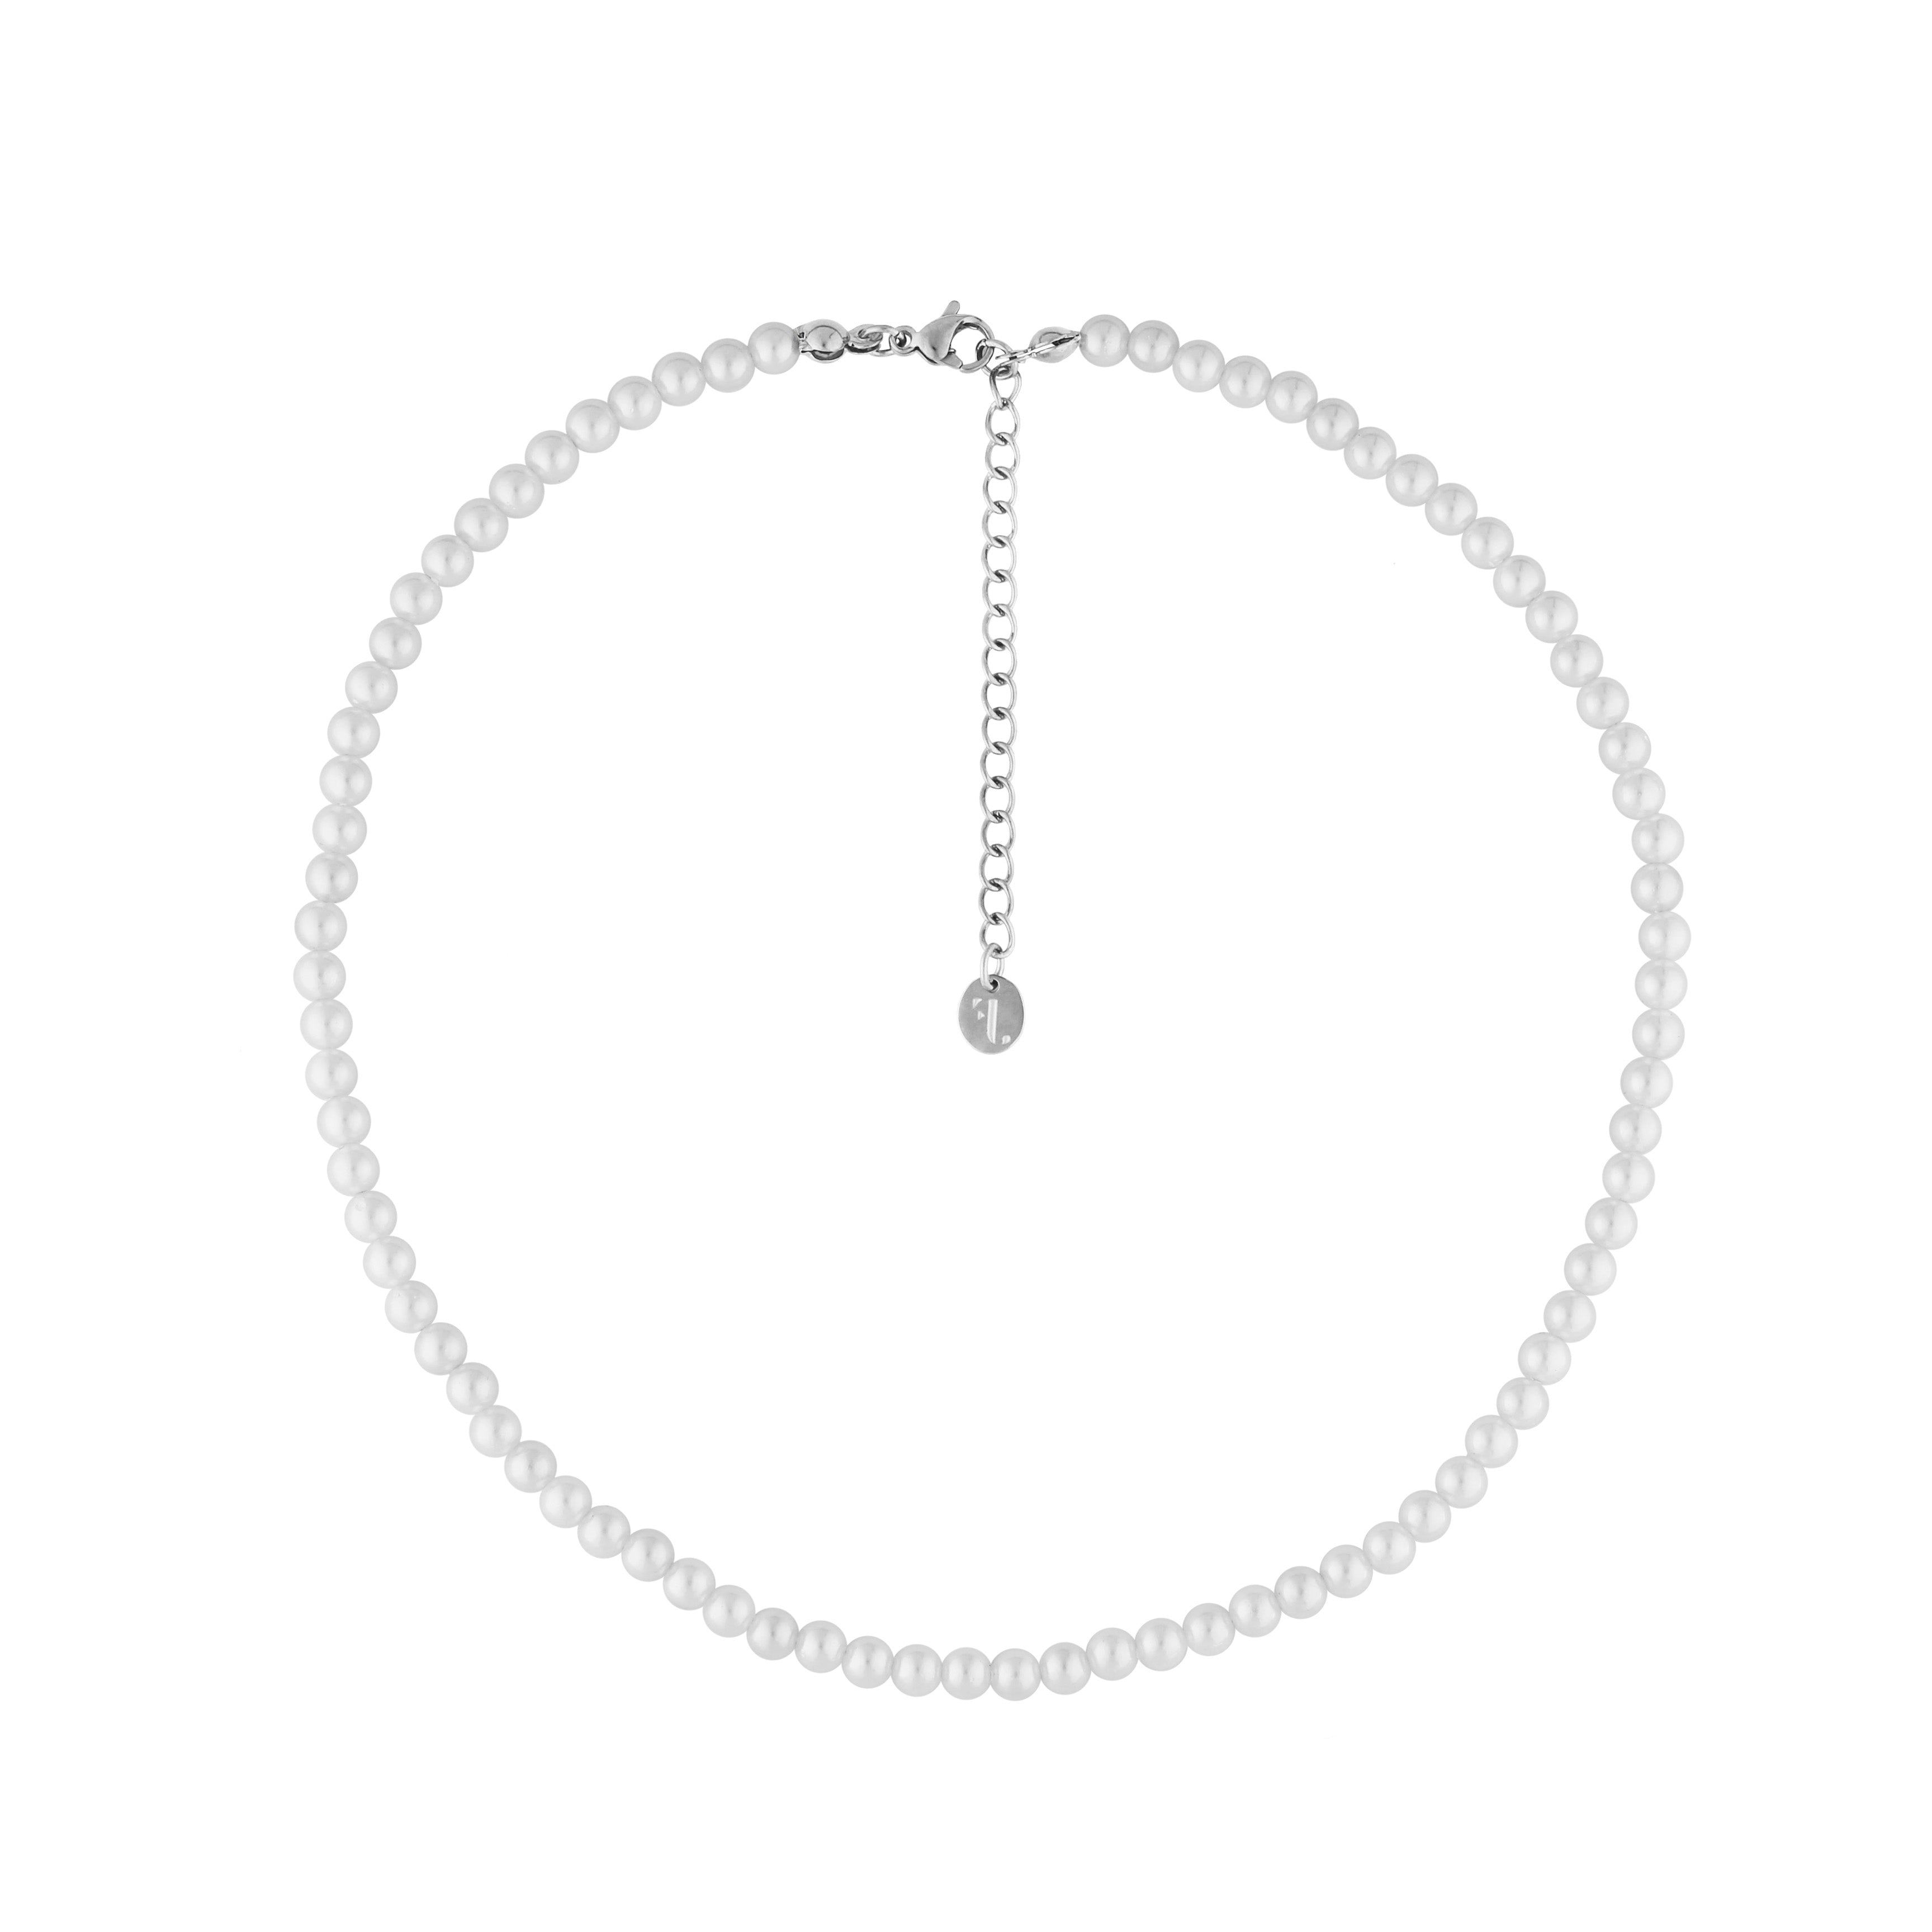 FJ Watches five jwlry bijou jewel jewelry Baby var necklace collier white beads pearls small perle bille petite blanche verre 4mm 37cm 5cm extension adjustable ajustable argent silver closure women femme glass water eau resiste resistant montreal canada design